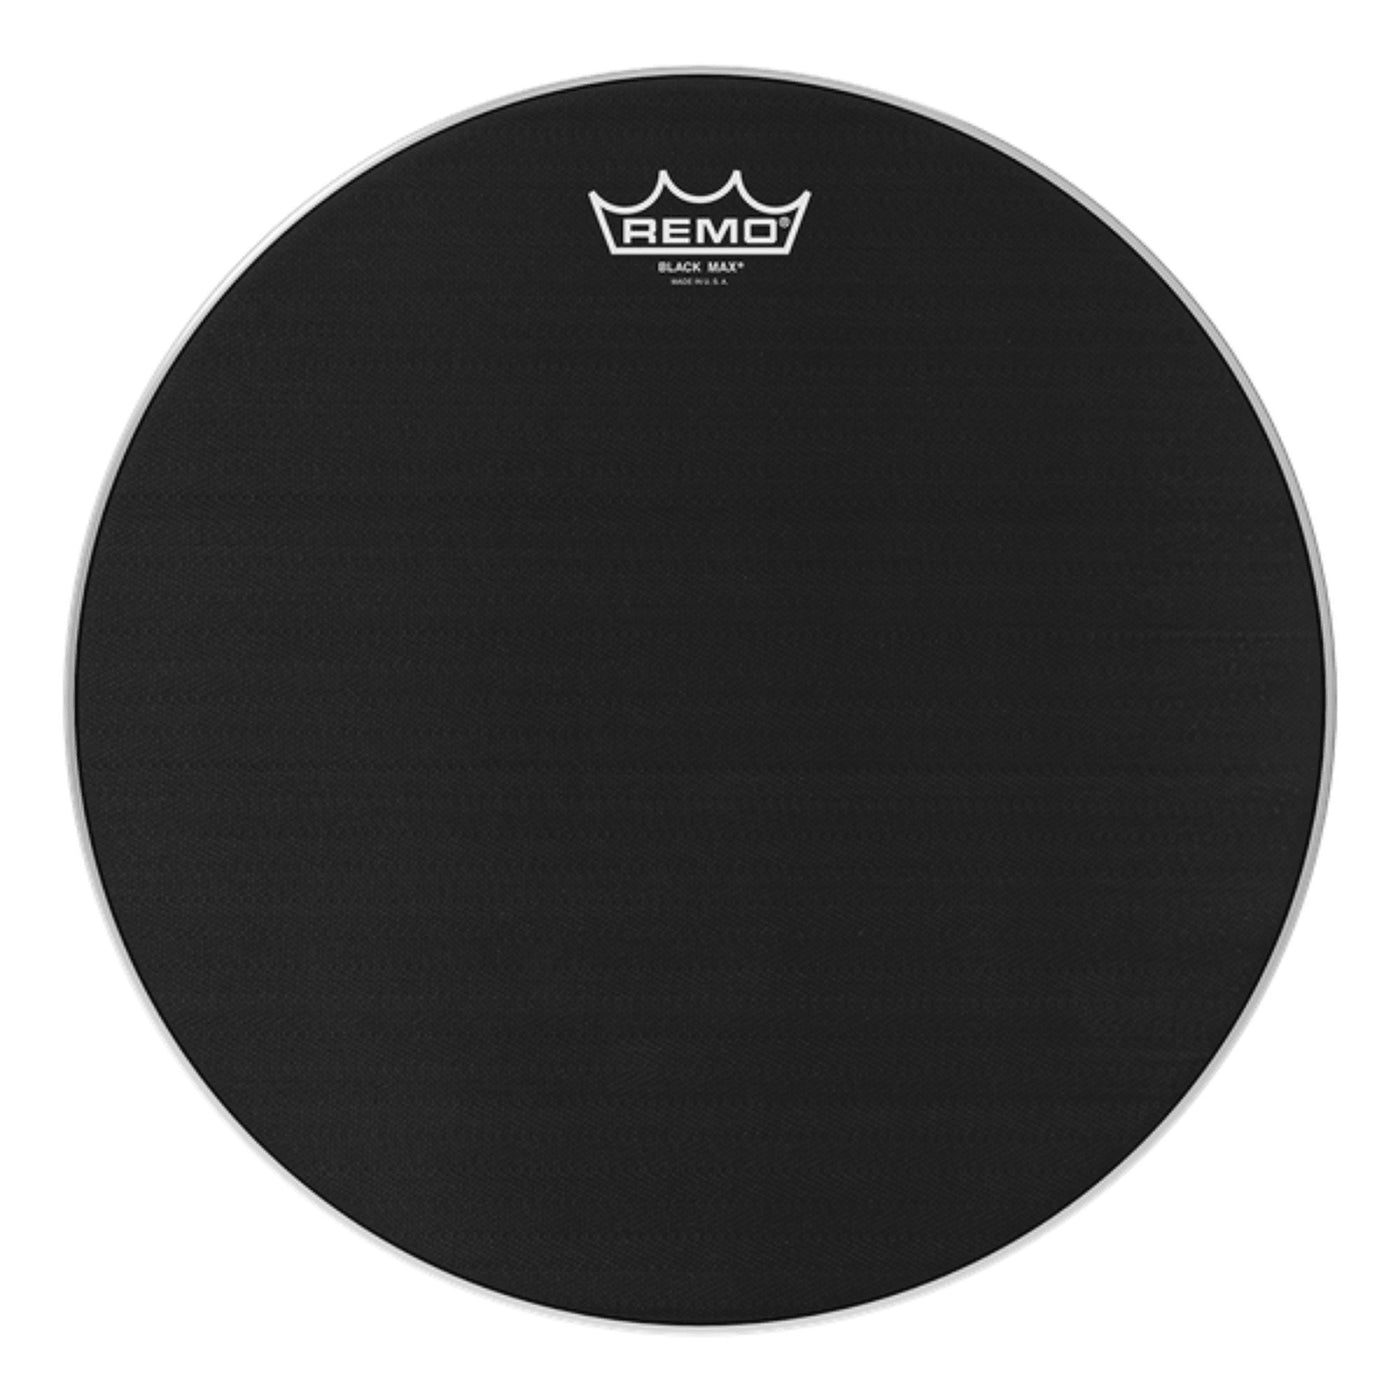 Remo KS-0614-00 14" Black Max Marching Snare Drum Top (Batter) Head